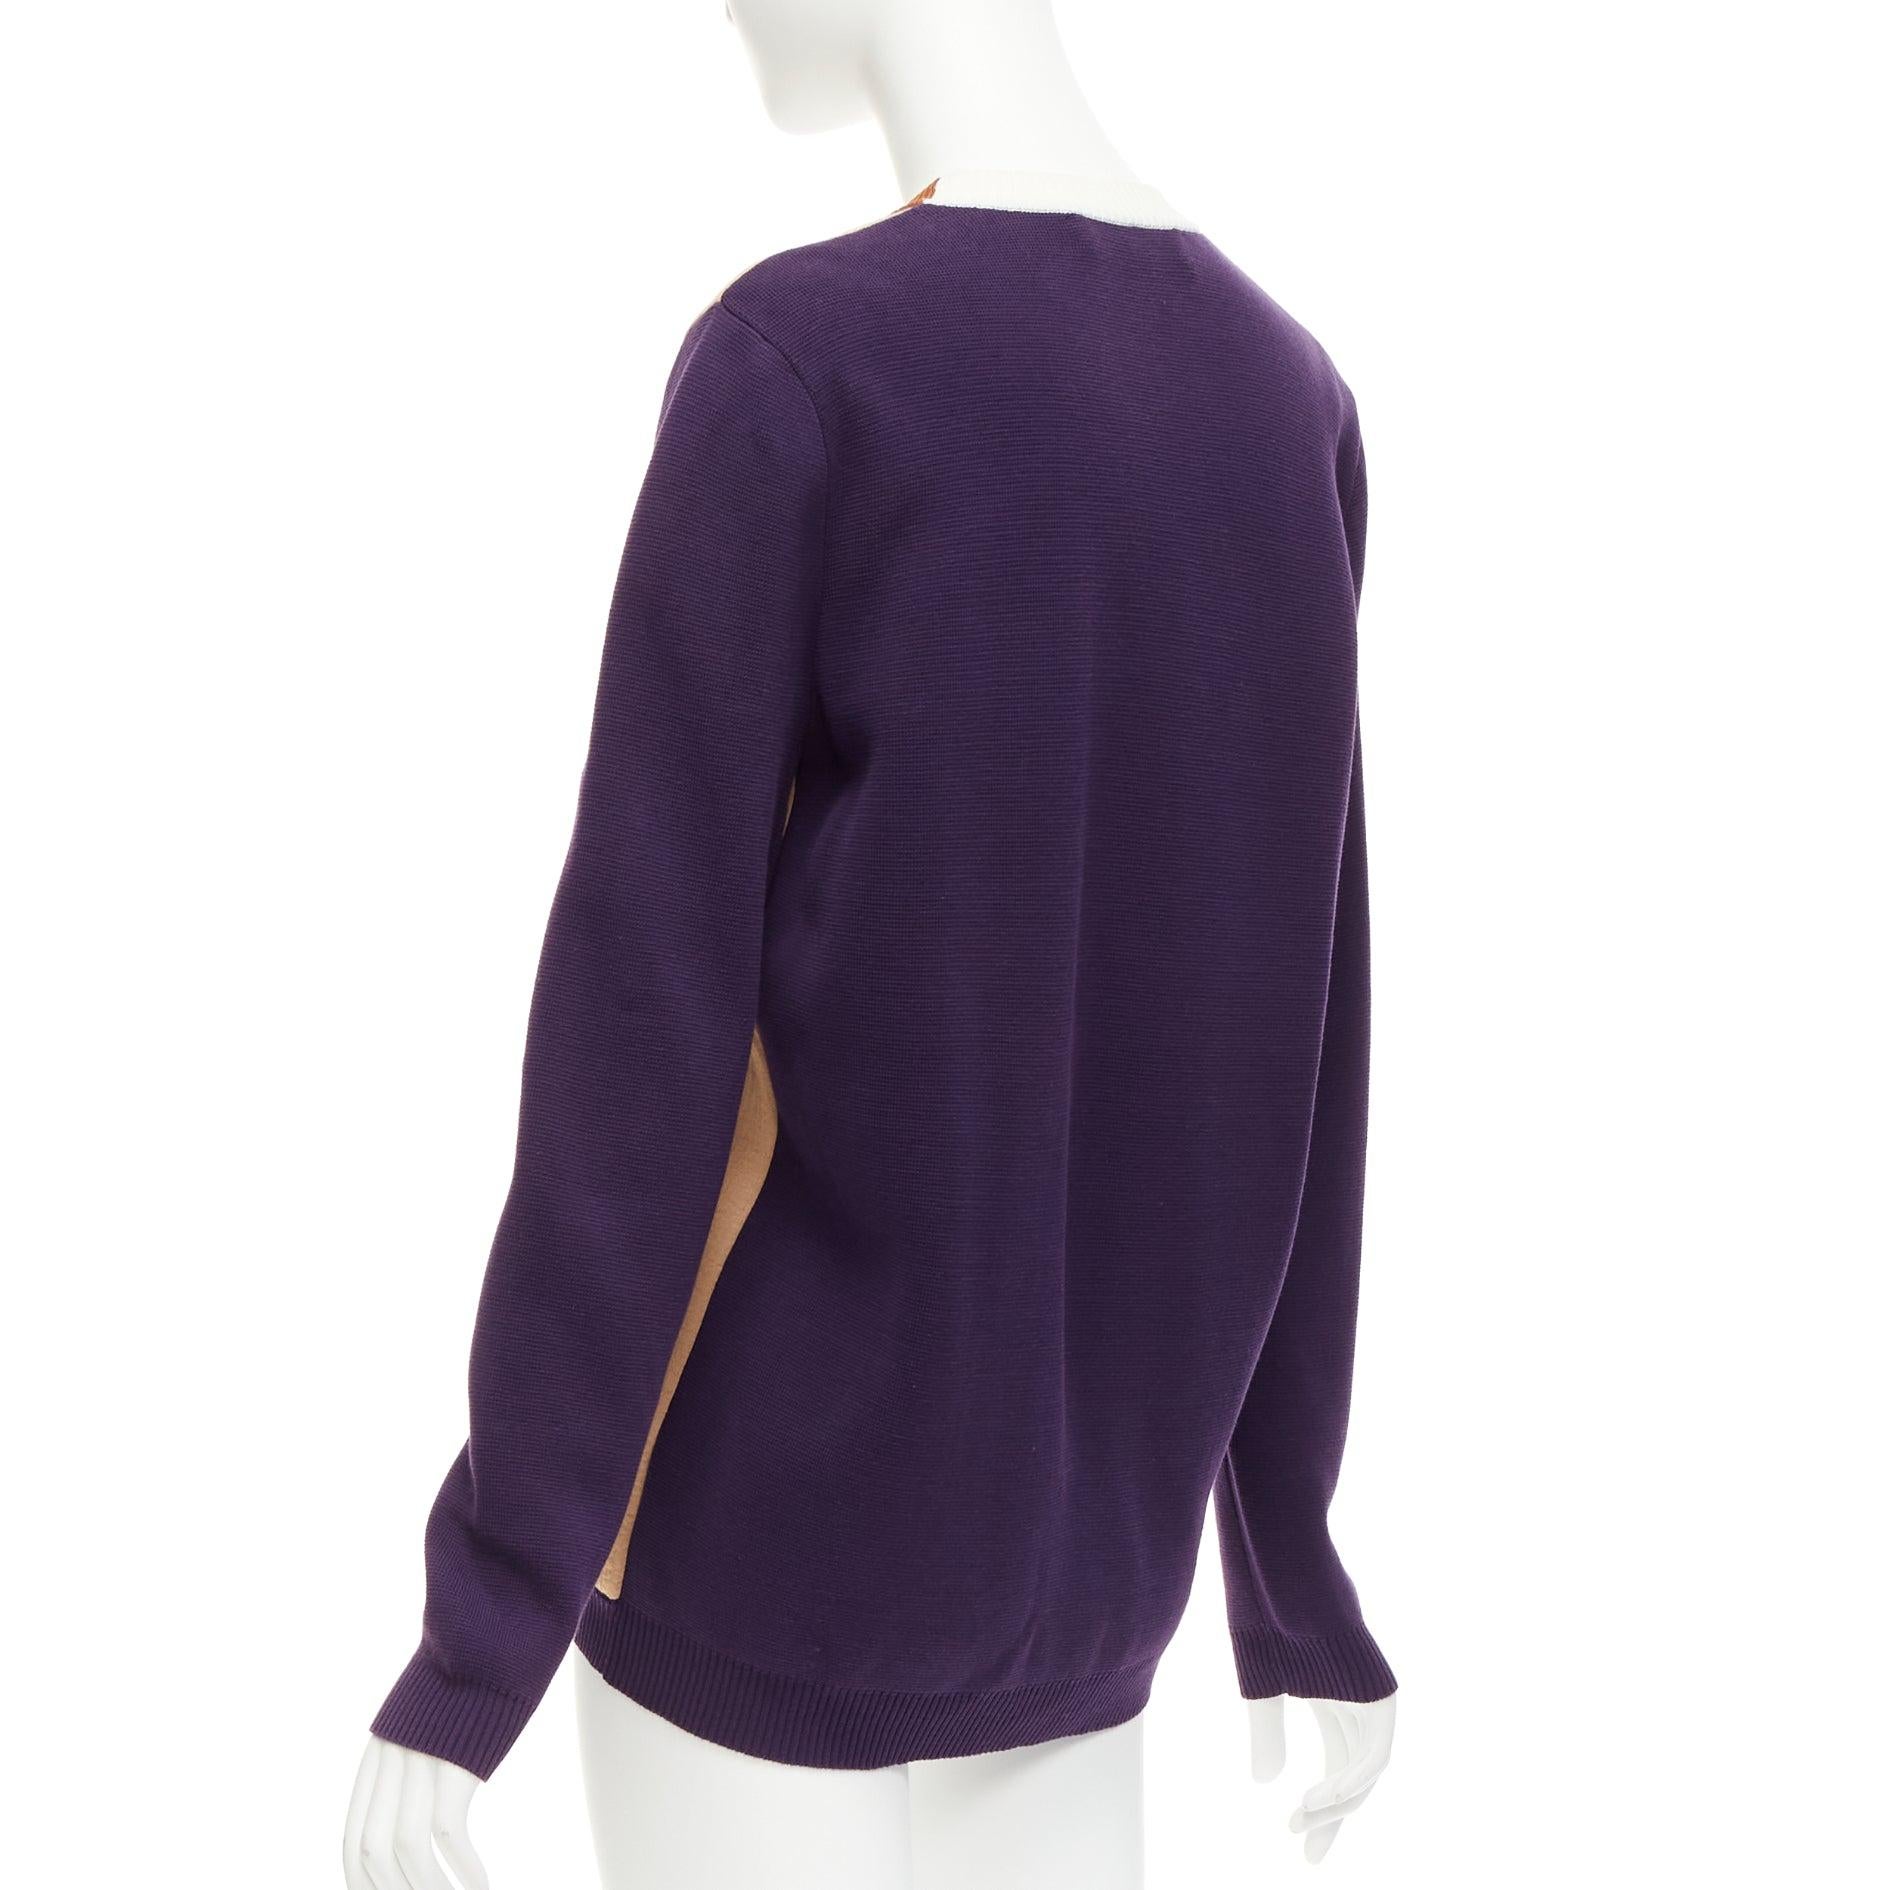 MARNI beige purple colorblocked mixed material cardigan sweater IT40 S
Reference: CELG/A00241
Brand: Marni
Material: Cotton, Blend
Color: Nude, Purple
Pattern: Solid
Closure: Button
Made in: Italy

CONDITION:
Condition: Excellent, this item was